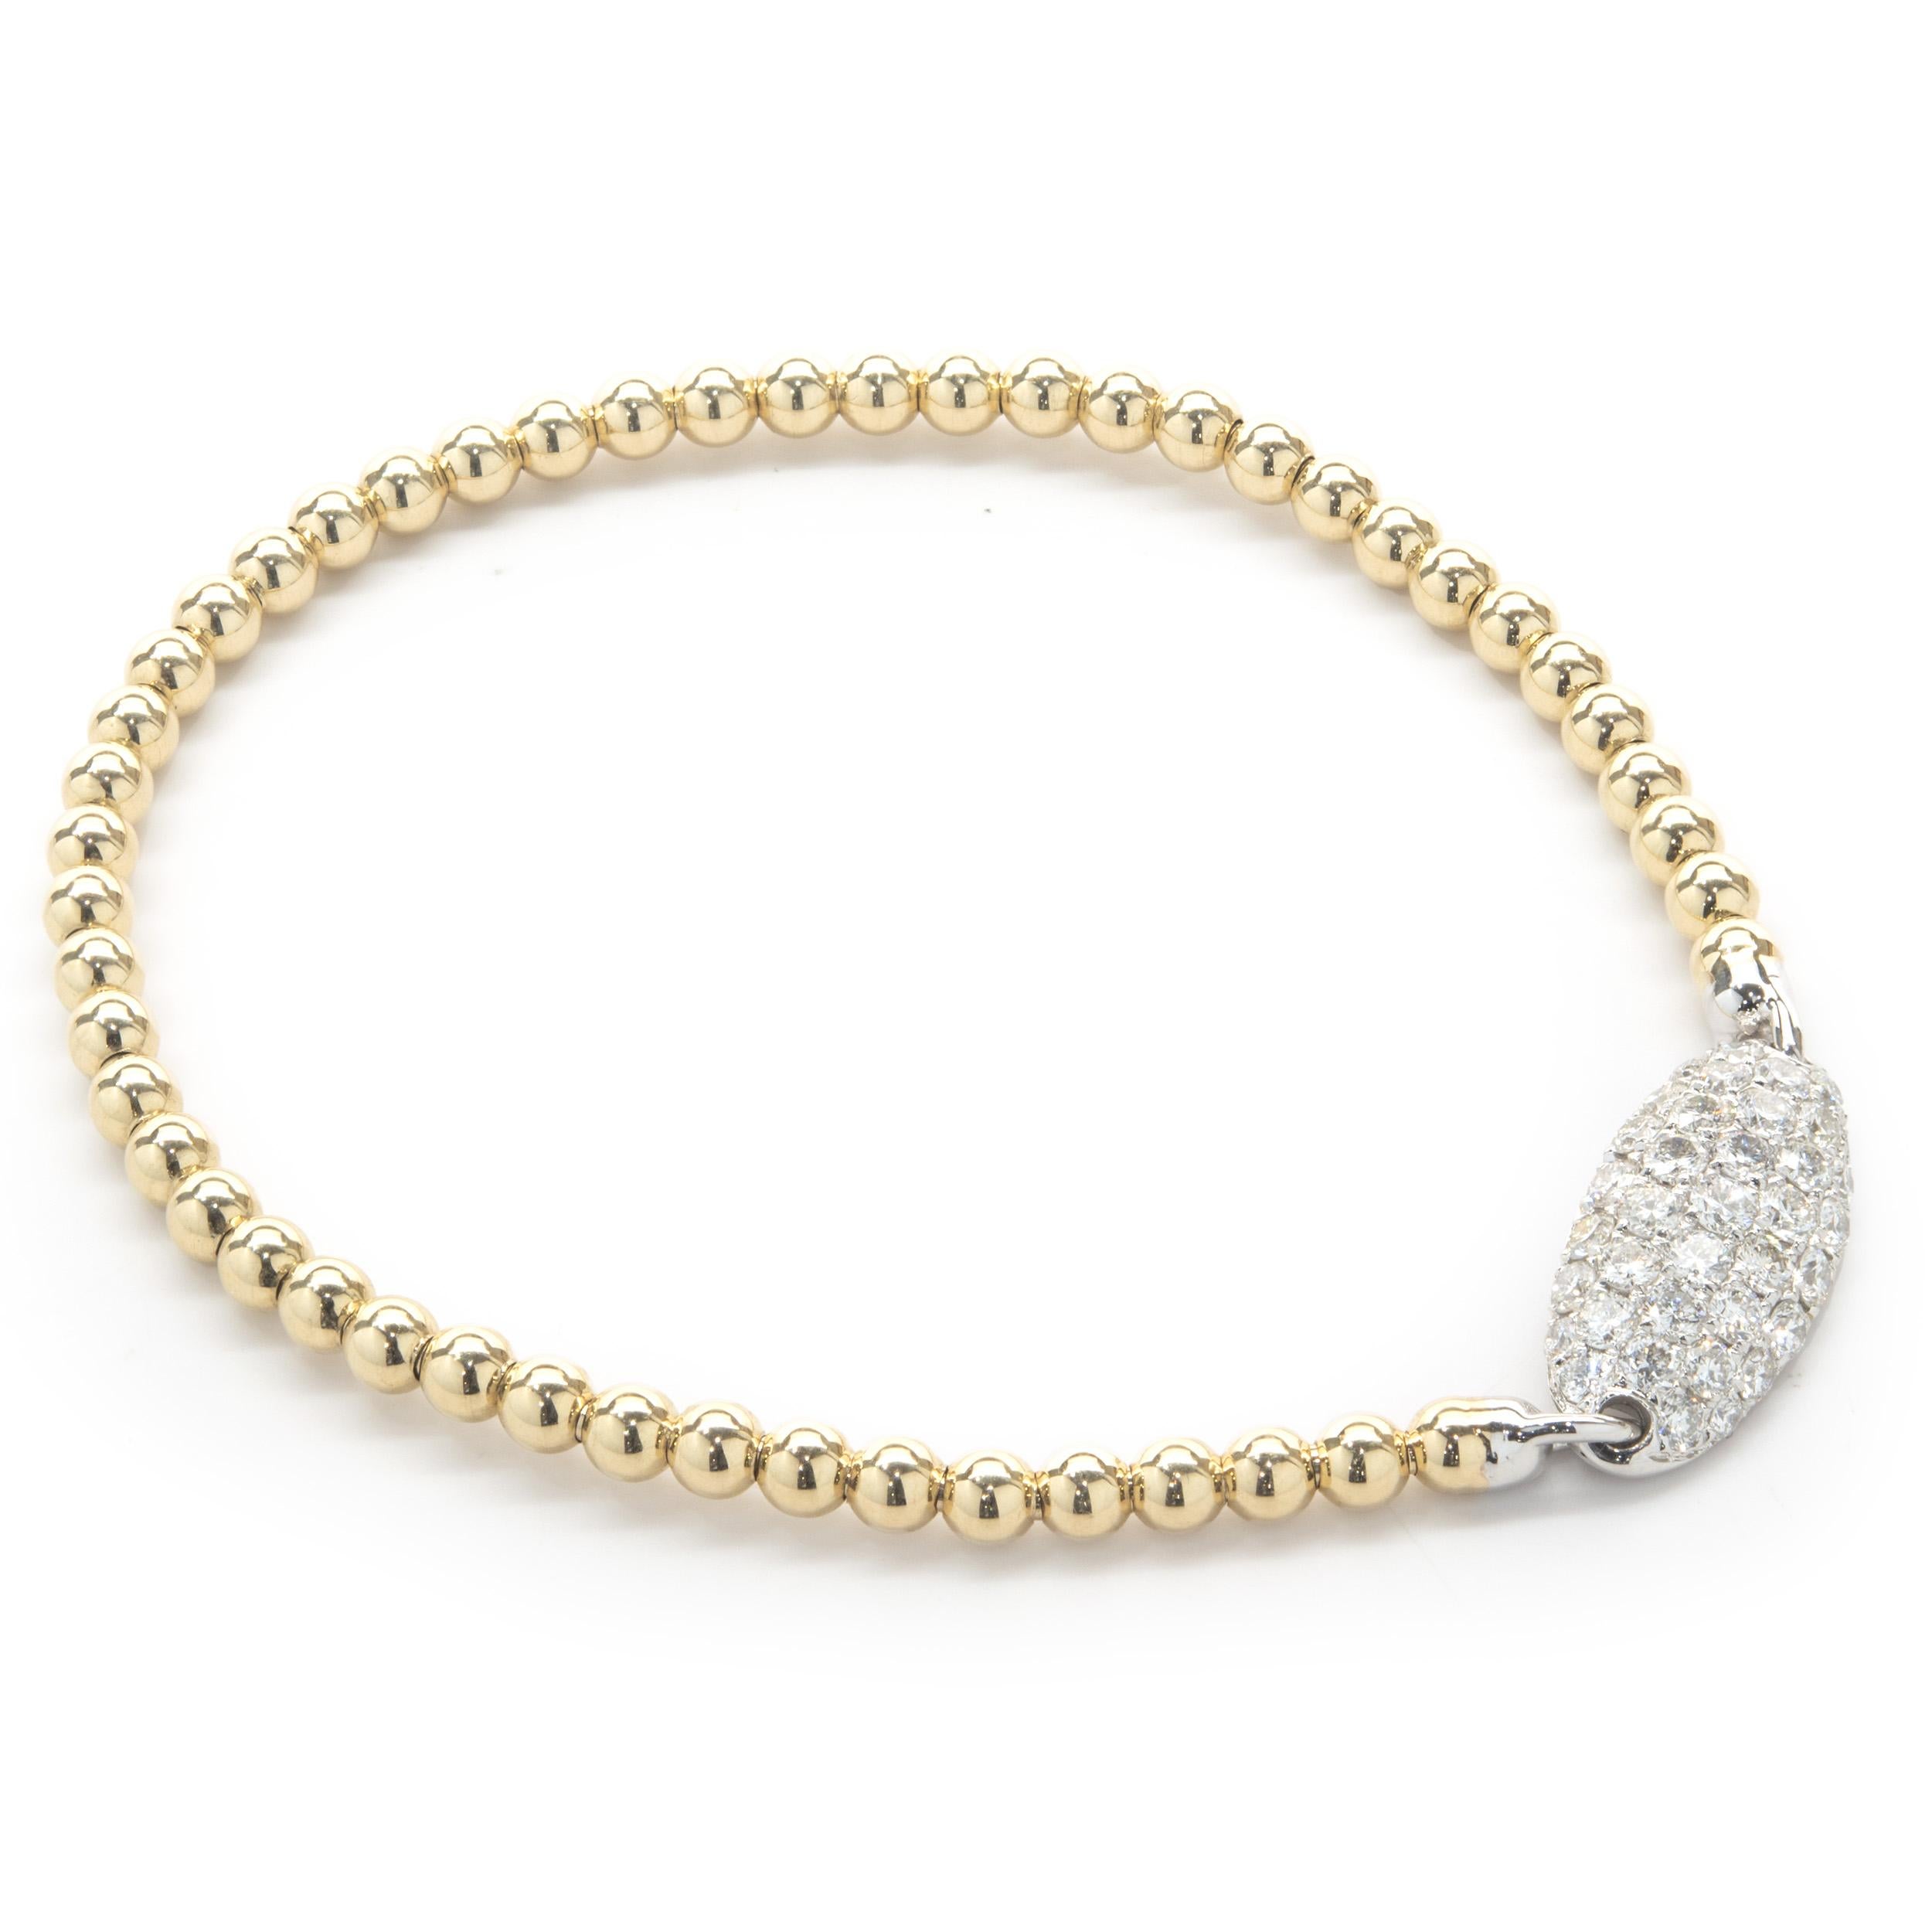 Material: 14K yellow & white gold
Diamonds:  round brilliant cut = 1.11cttw
Color: G 
Clarity: SI1
Dimensions: bracelet will fit up to a 7-inch wrist 
Weight: 5.11 grams